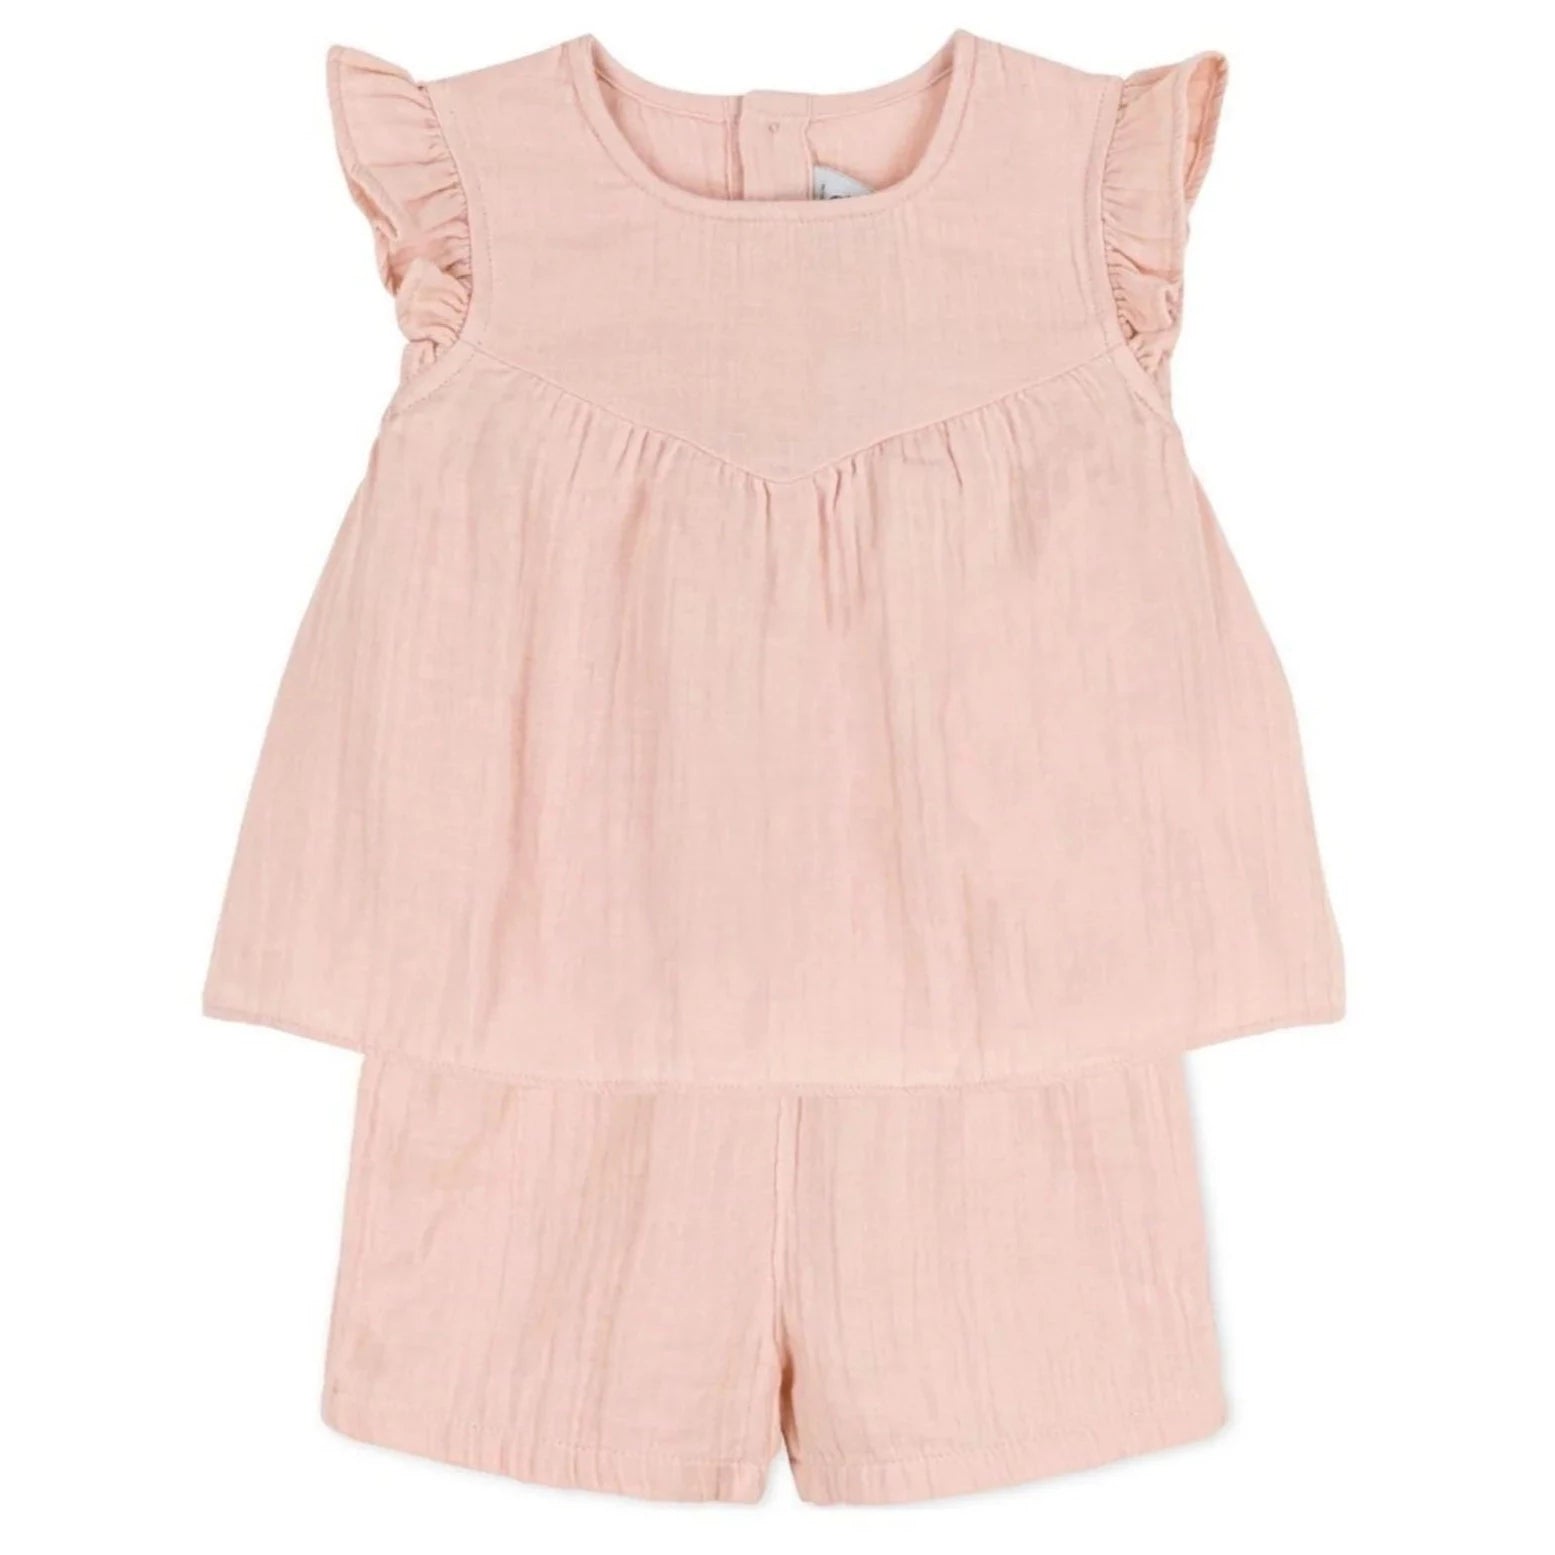 Gauze Sleeveless Top and Shorts Set in Light Pink